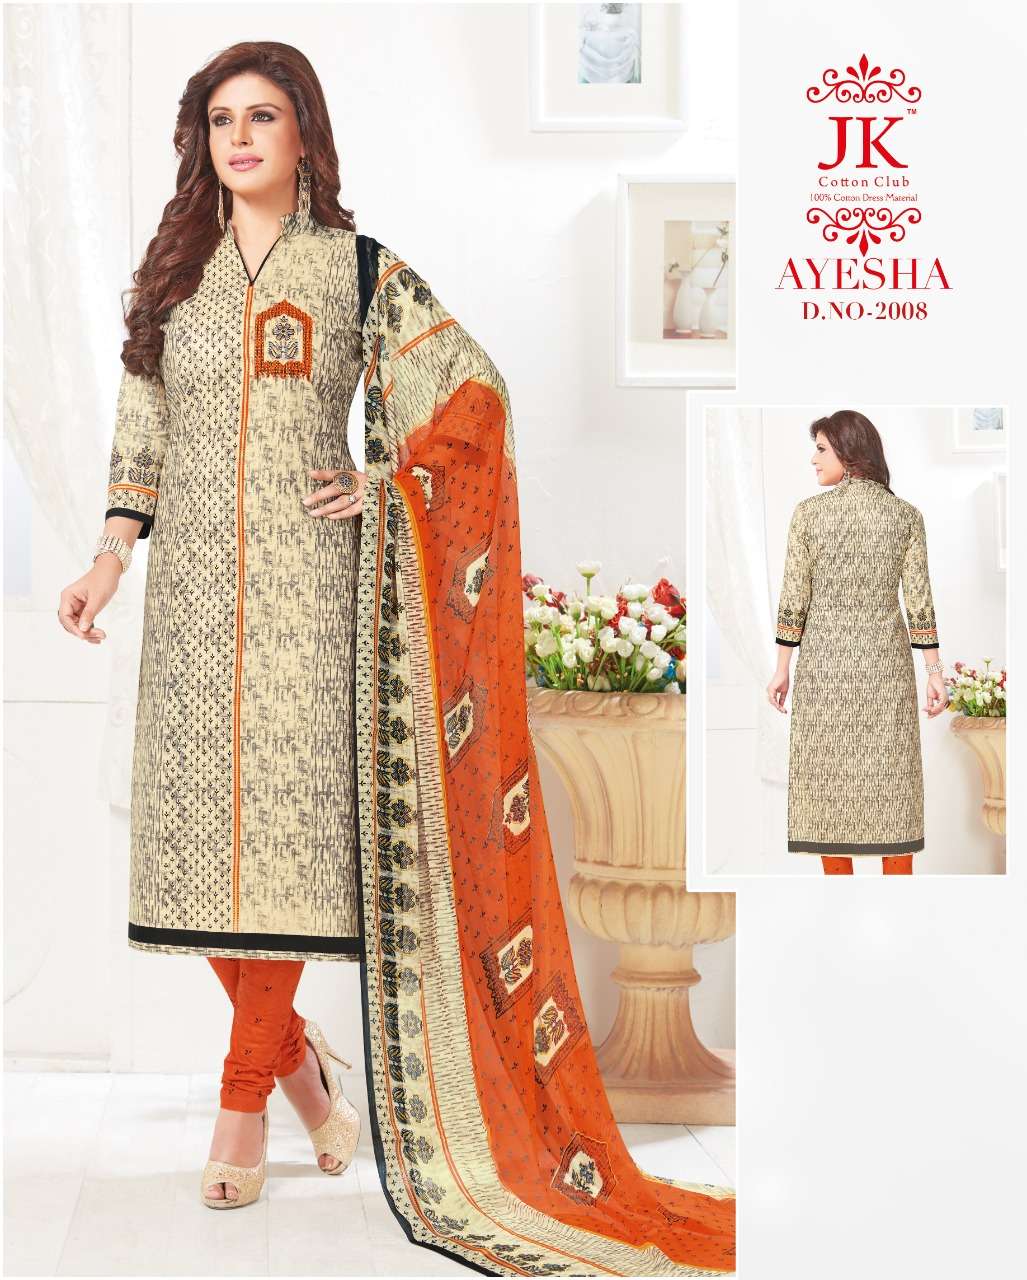 Ayesha Vol-2 By Jk Cotton Club 2001 To 2010 Series Designer Suits Collection Beautiful Stylish Colorful Fancy Party Wear & Occasional Wear Cotton Print Dresses At Wholesale Price